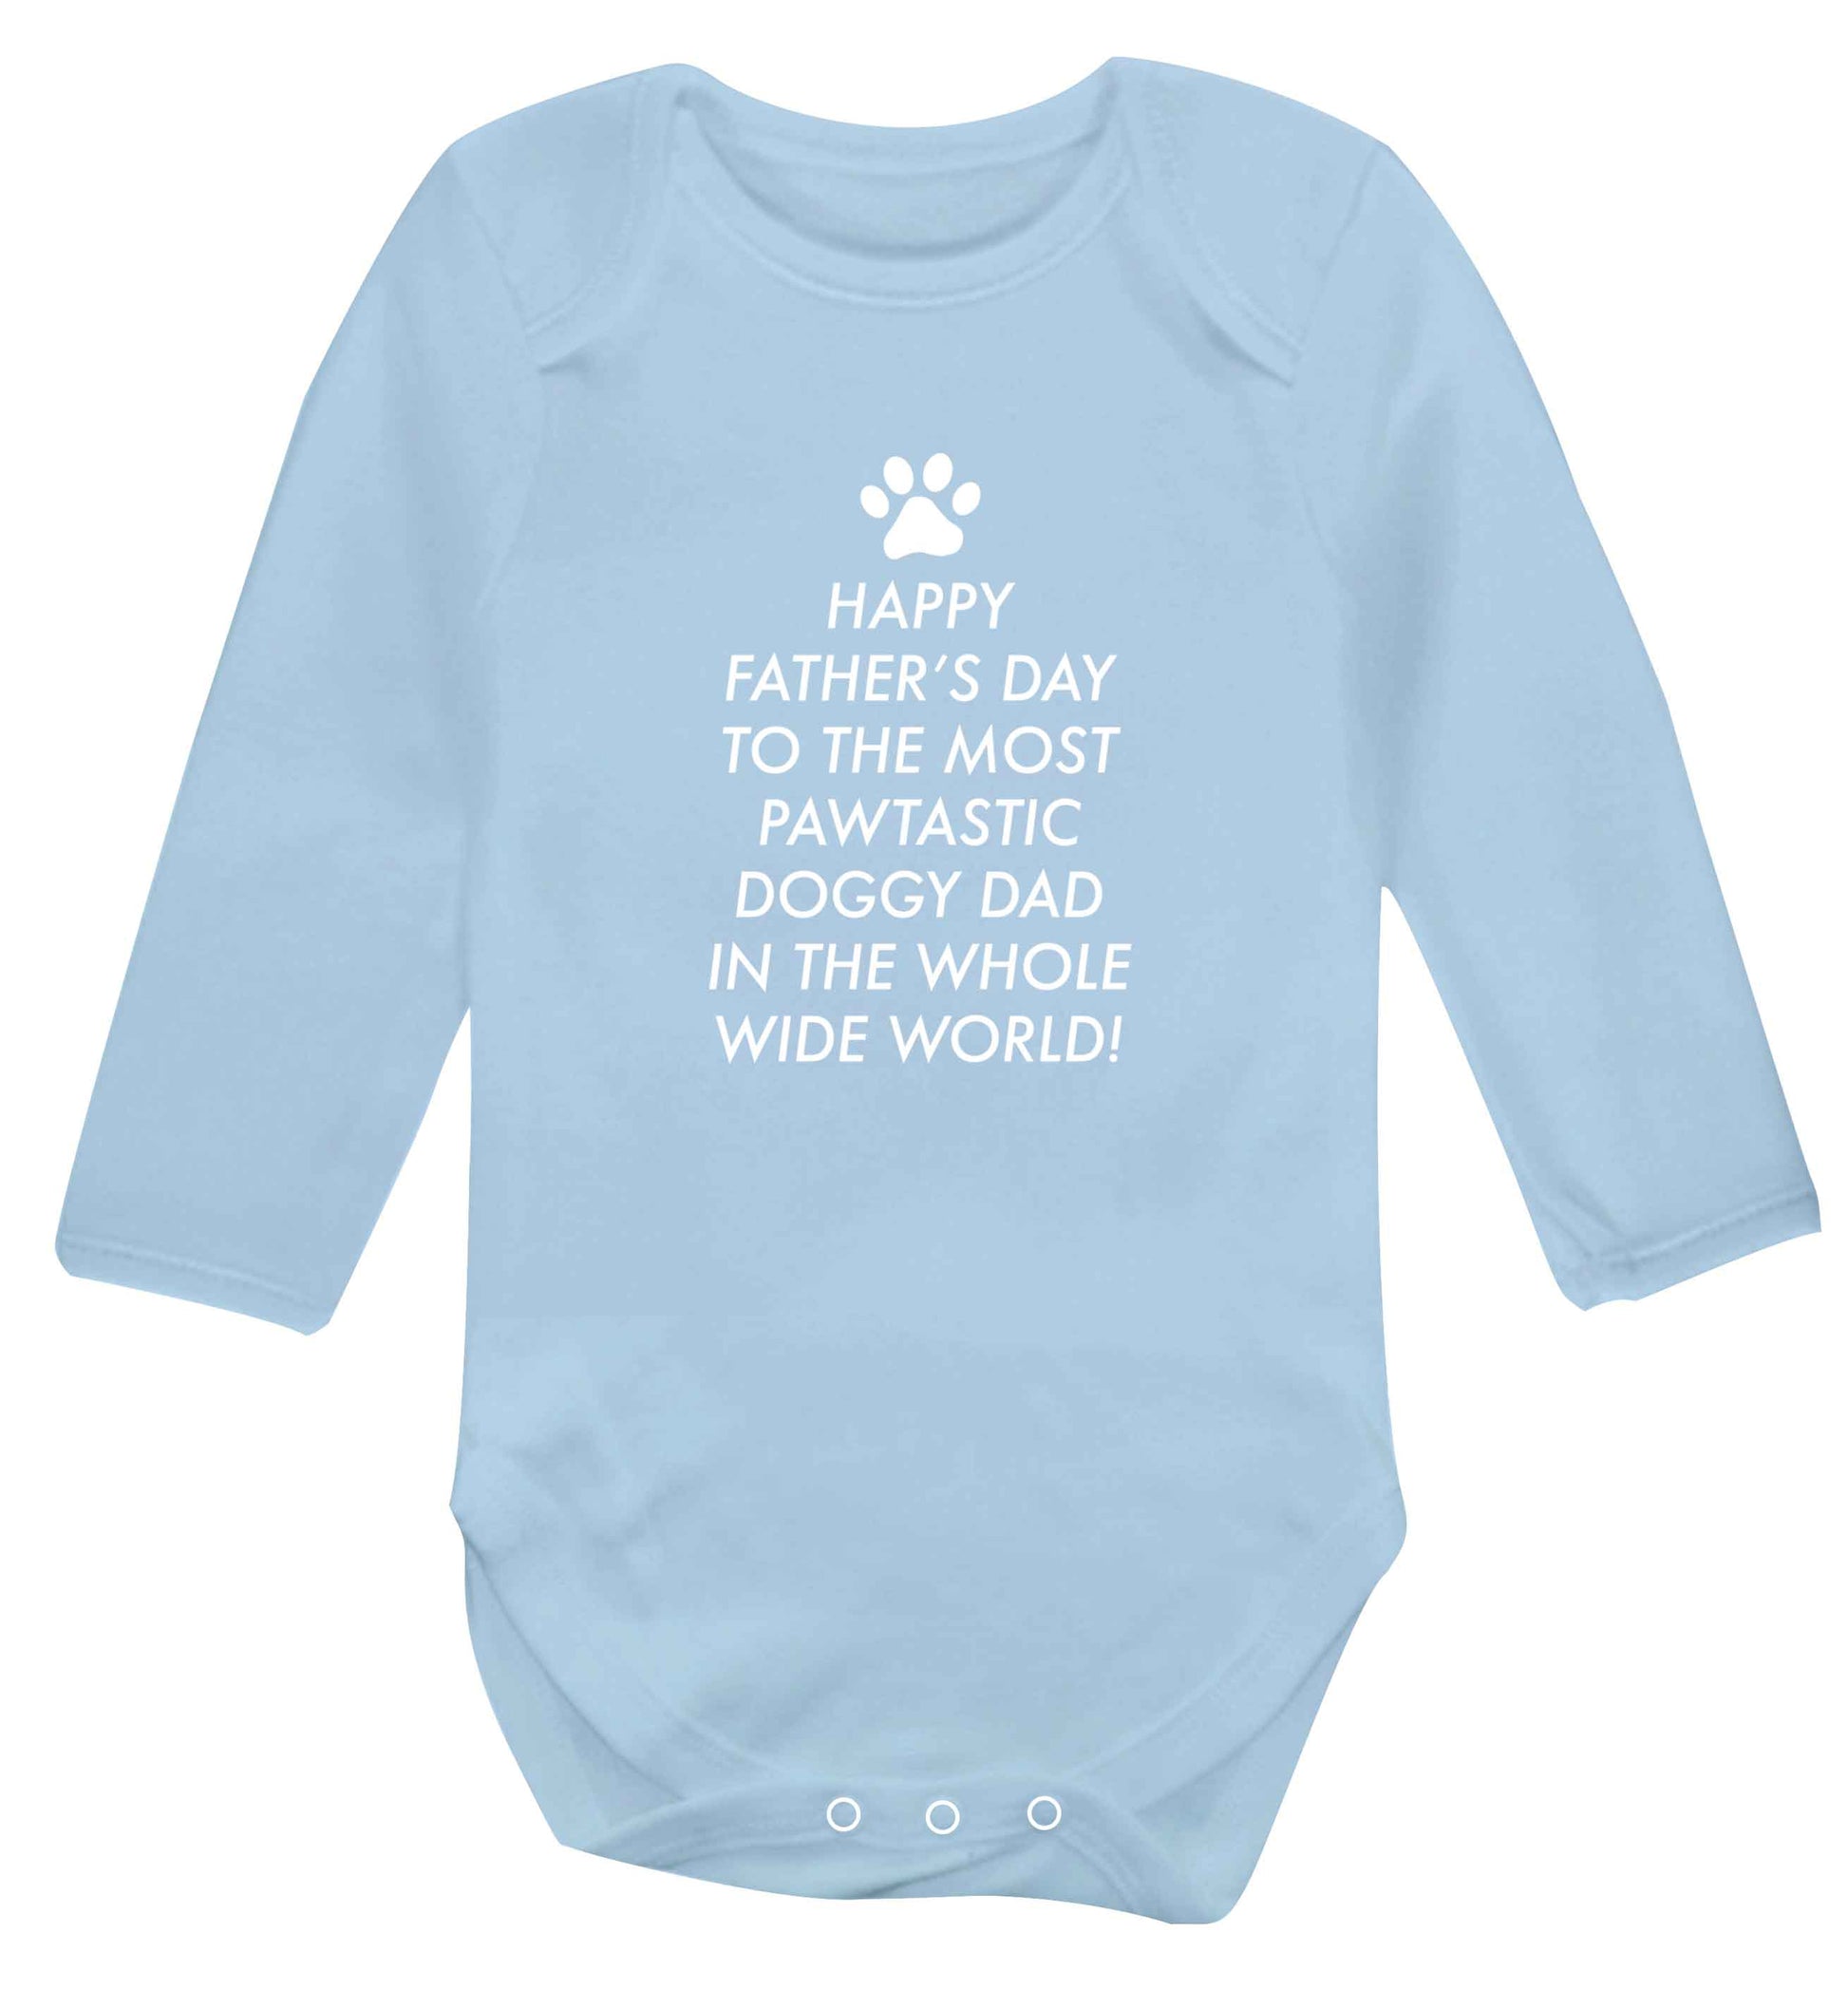 Happy Father's day to the most pawtastic doggy dad in the whole wide world!baby vest long sleeved pale blue 6-12 months